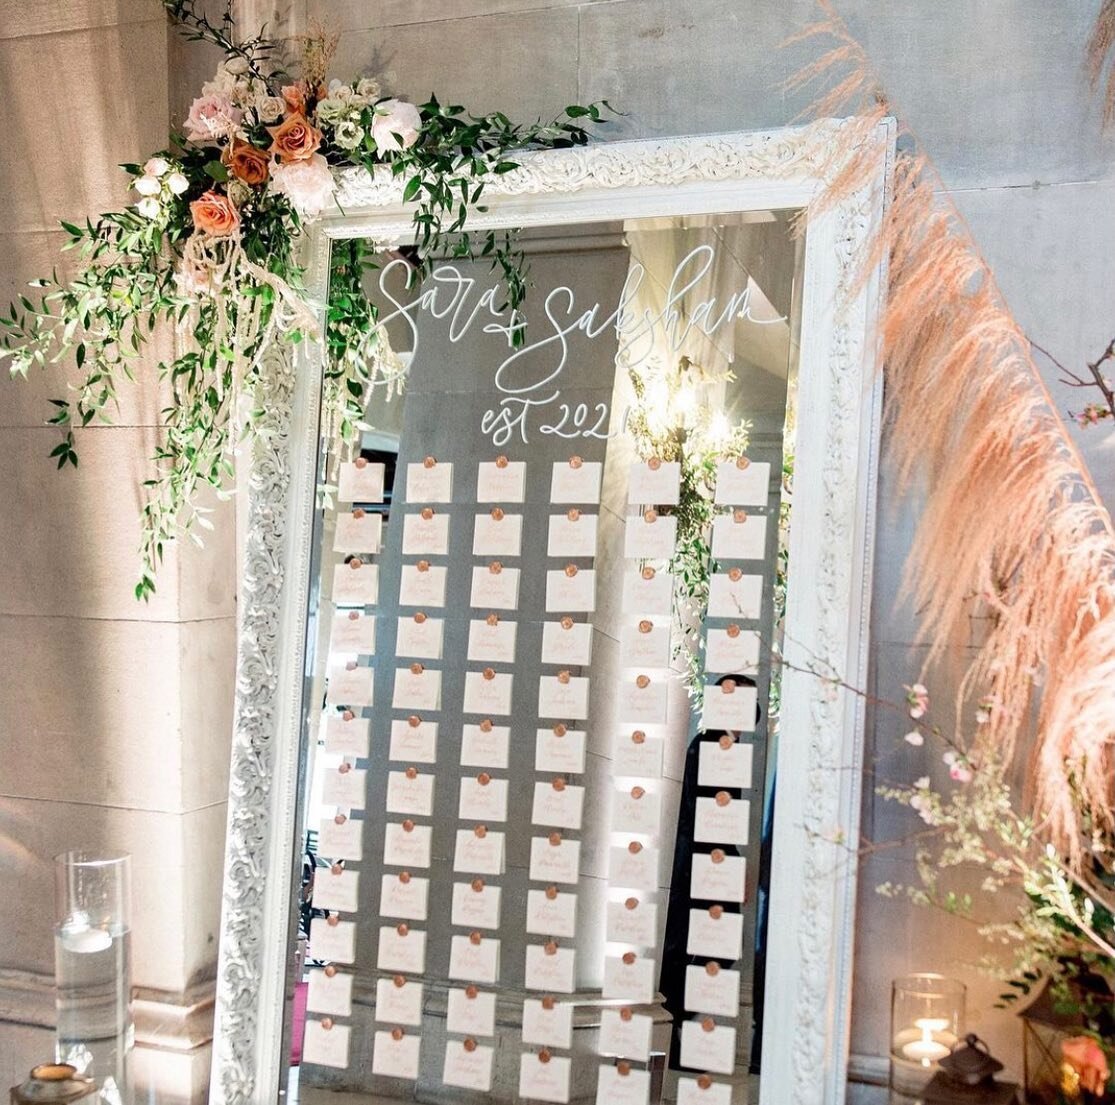 Statement pieces at your wedding are always a good idea (imho). Featured piece- Antoinette Mirror ✨🪞🤍🌾✨ 📸: @twahphotography 

Venue: @sandsptevents 
Stylist + Planner: @aboveallevents 
Floral Designer: @jennywildflower 
Photographer: @twahphotogr